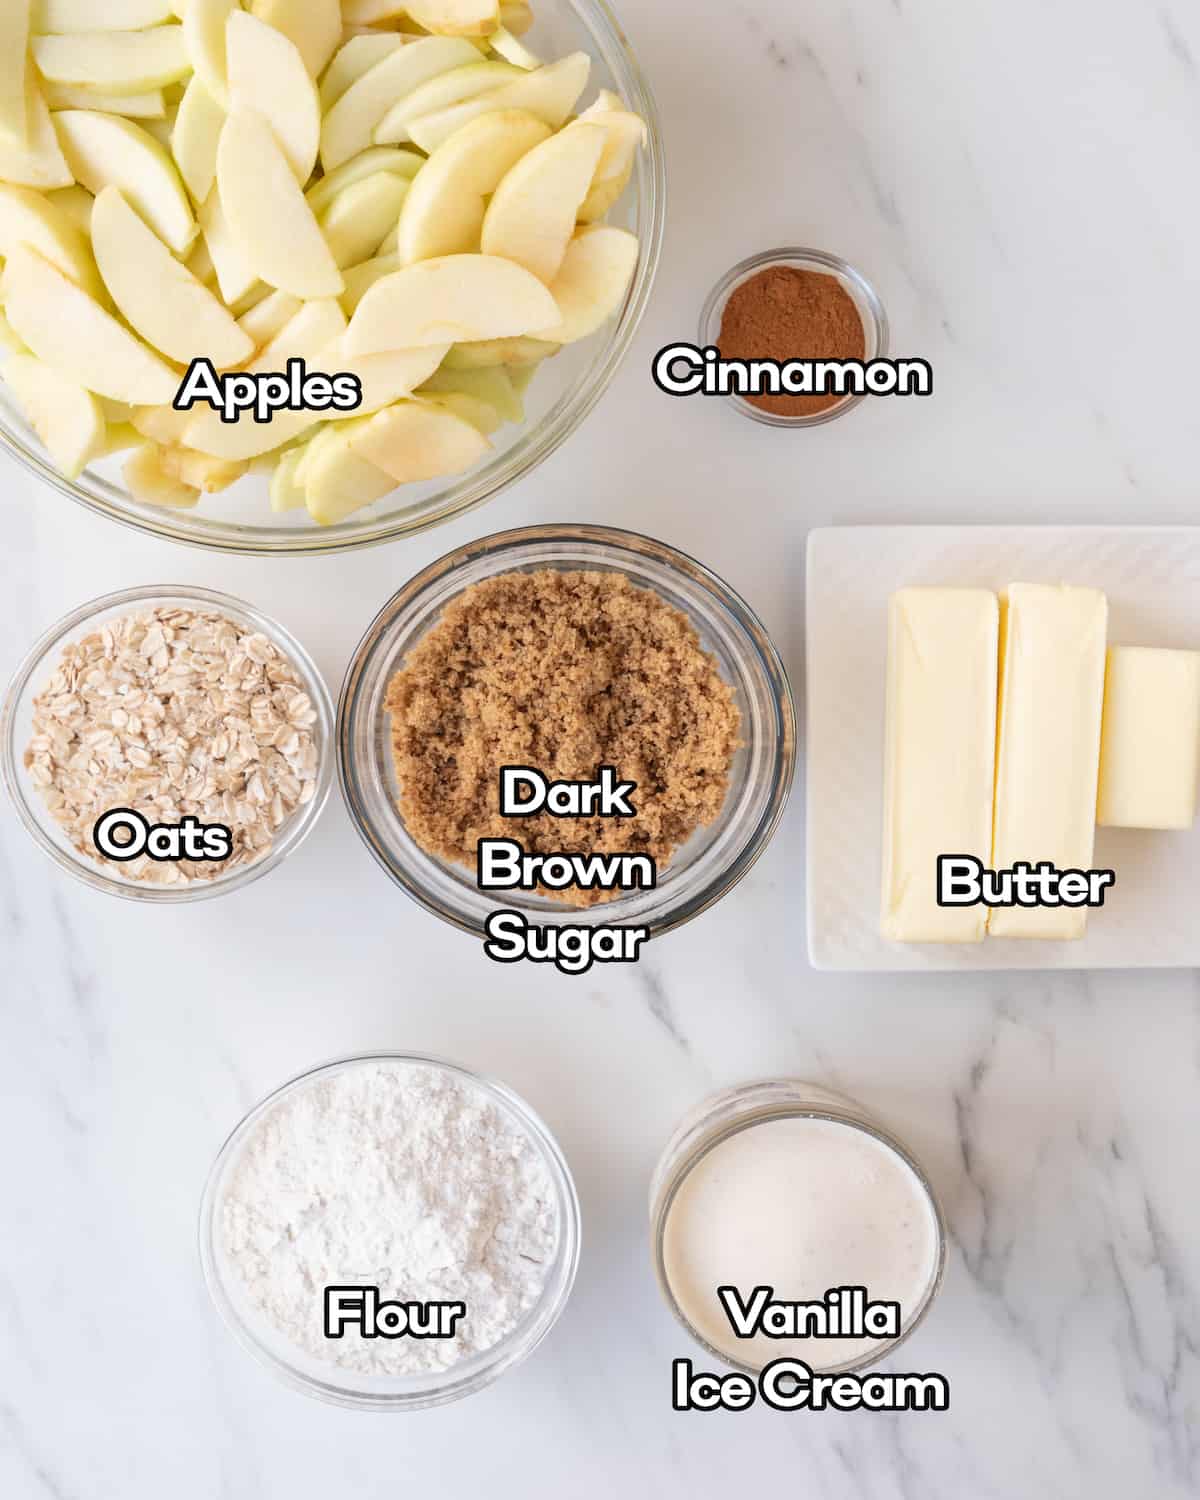 Ingredients in individual clear bowls such as sliced apples, cinnamon, oats, dark brown sugar, butter, flour, and vanilla ice cream on a white countertop.